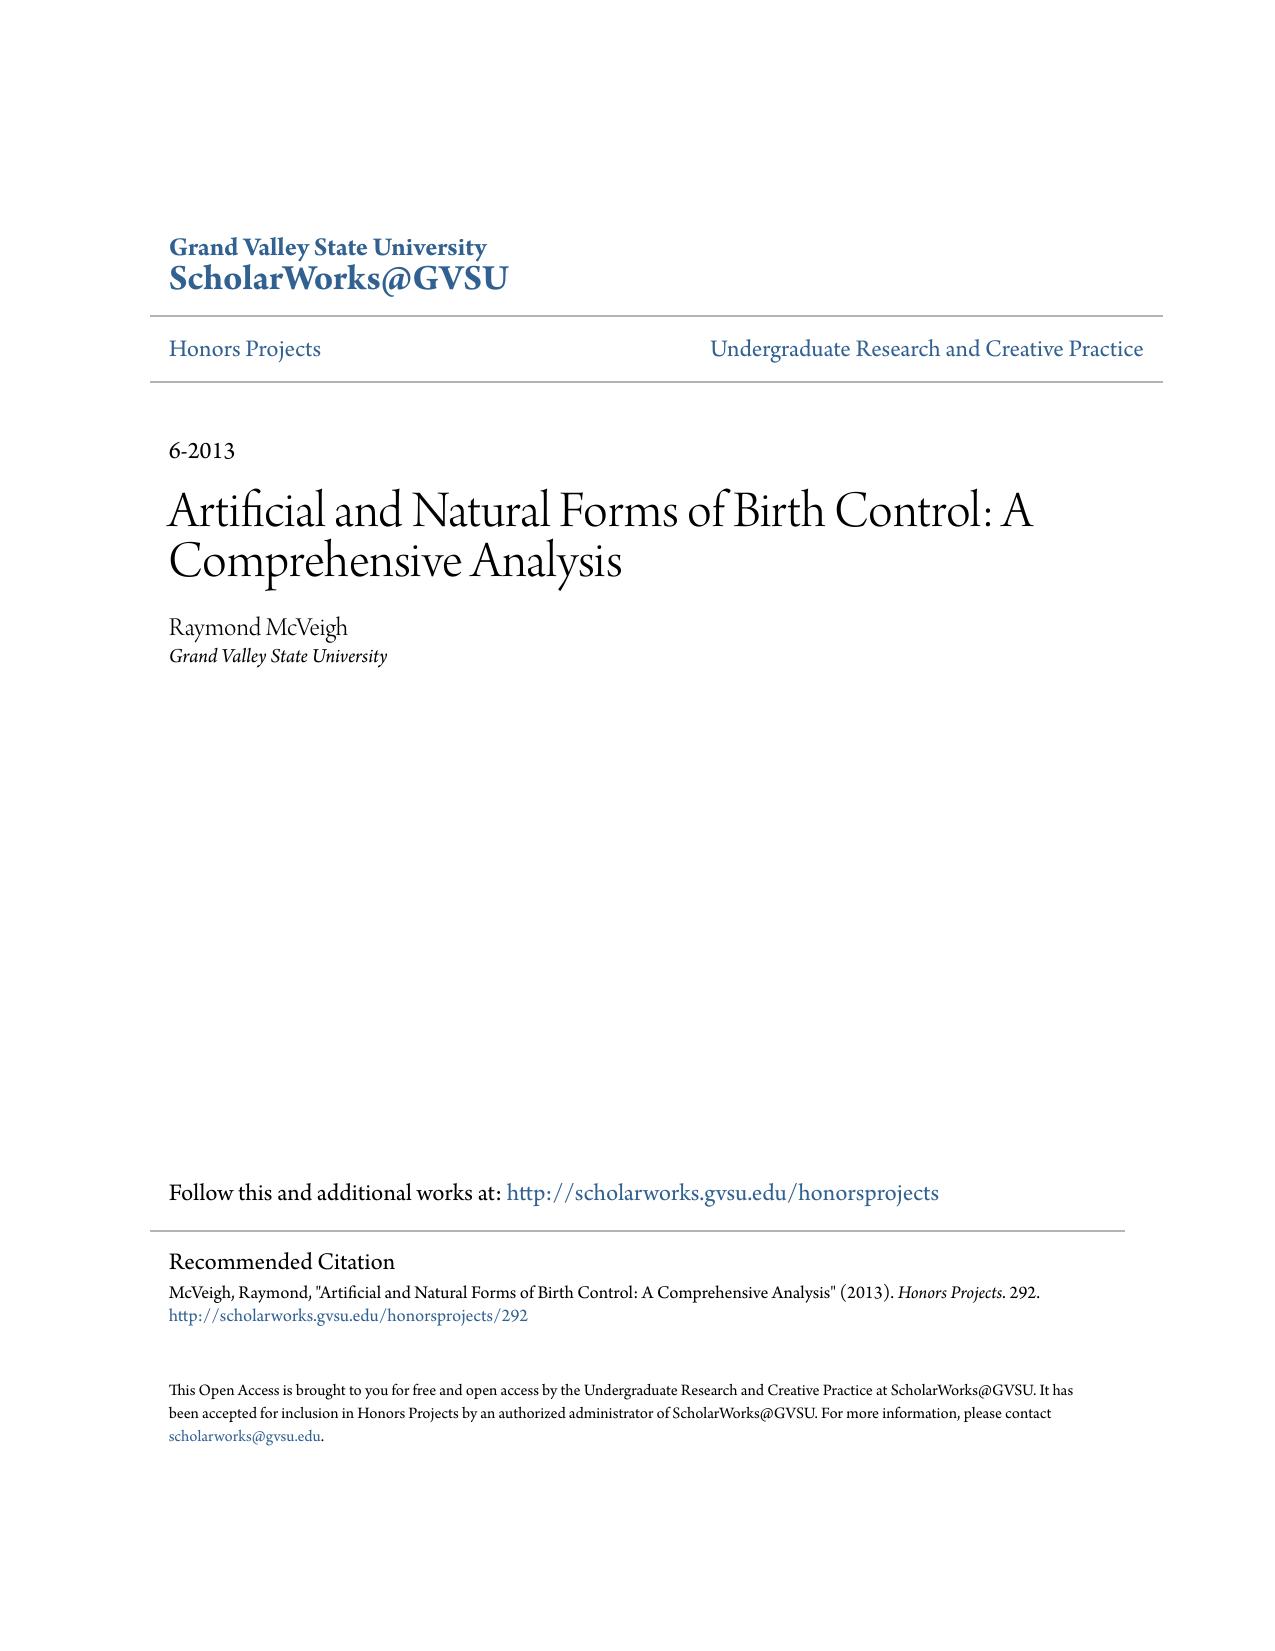 Artificial and Natural Forms of Birth Control:  A Comprehensive Analysis